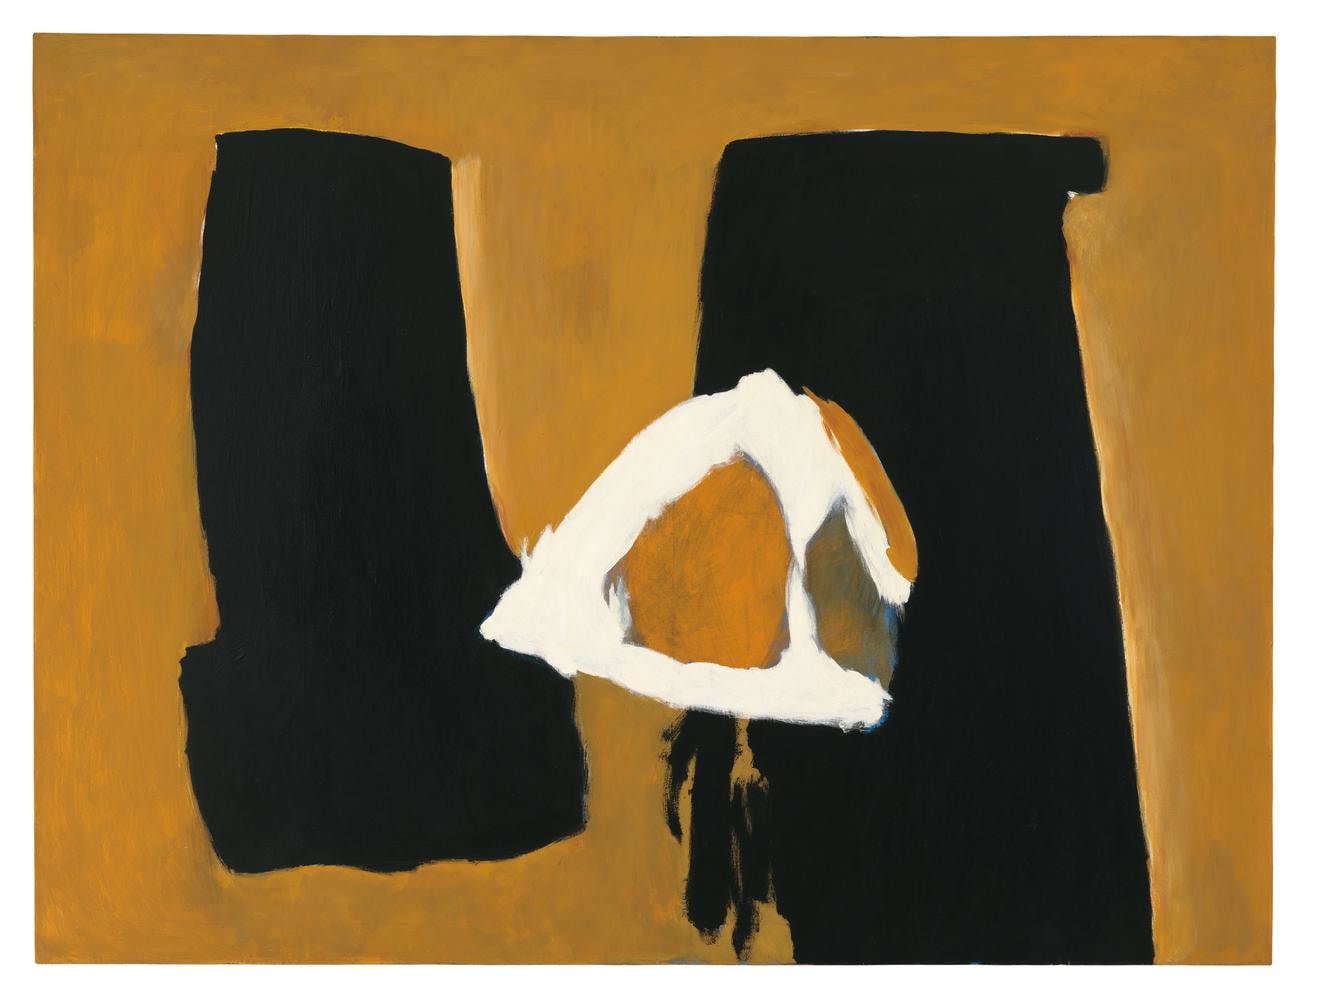 Robert Motherwell
Afternoon in Barcelona
1958
acrylic and oil on canvas
54 x 73 inches (137.2 x 185.4 cm)&amp;nbsp;